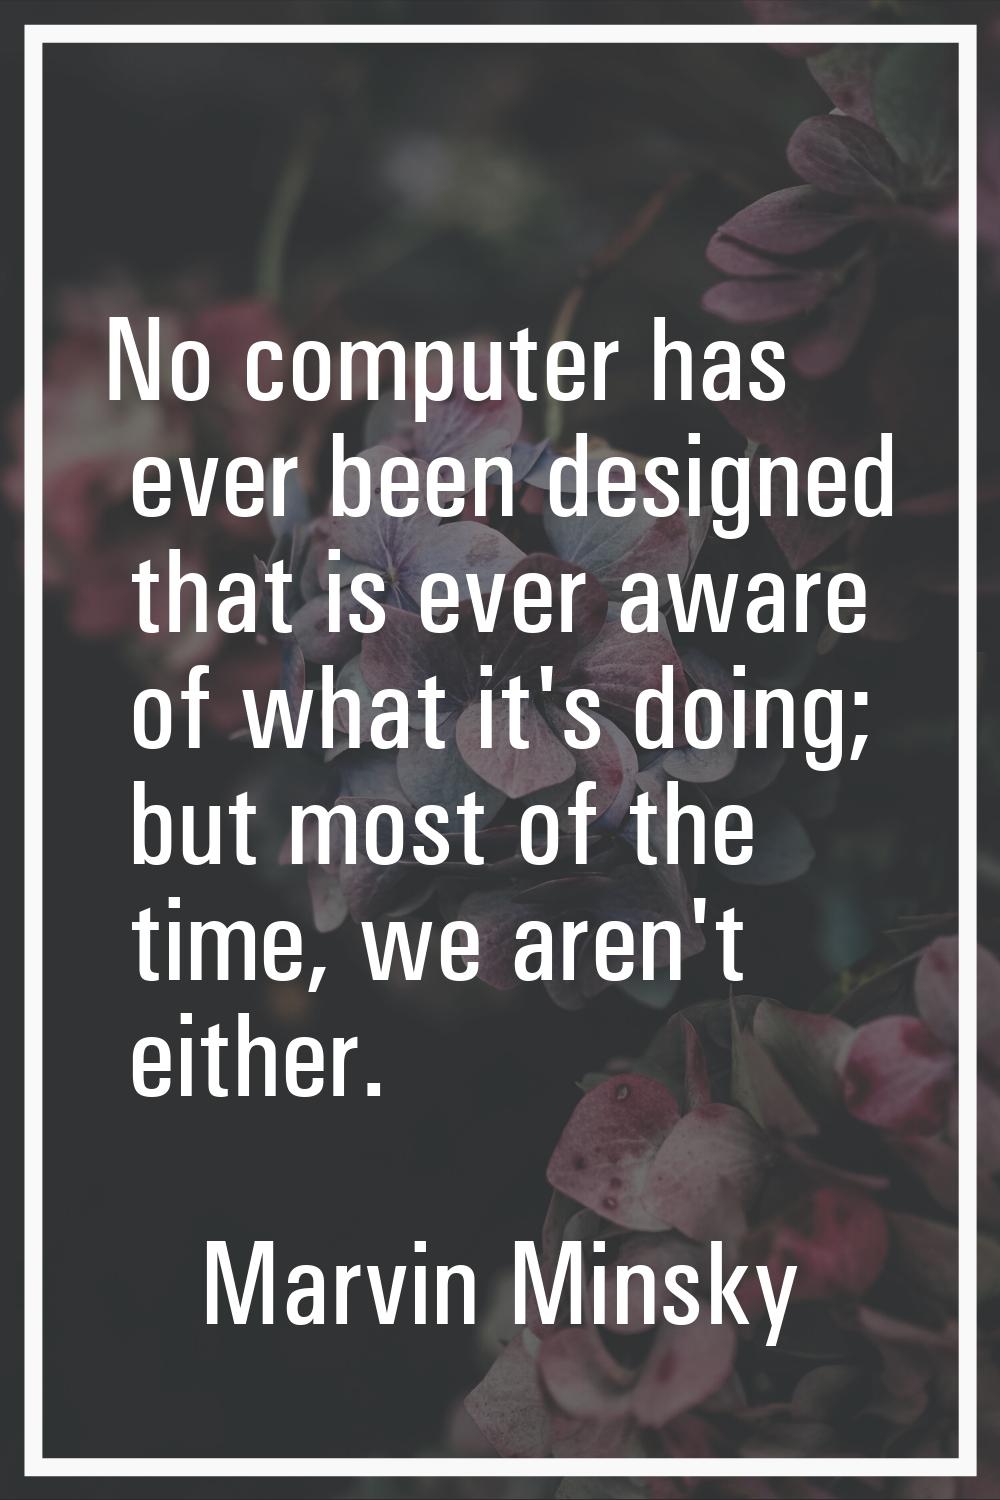 No computer has ever been designed that is ever aware of what it's doing; but most of the time, we 